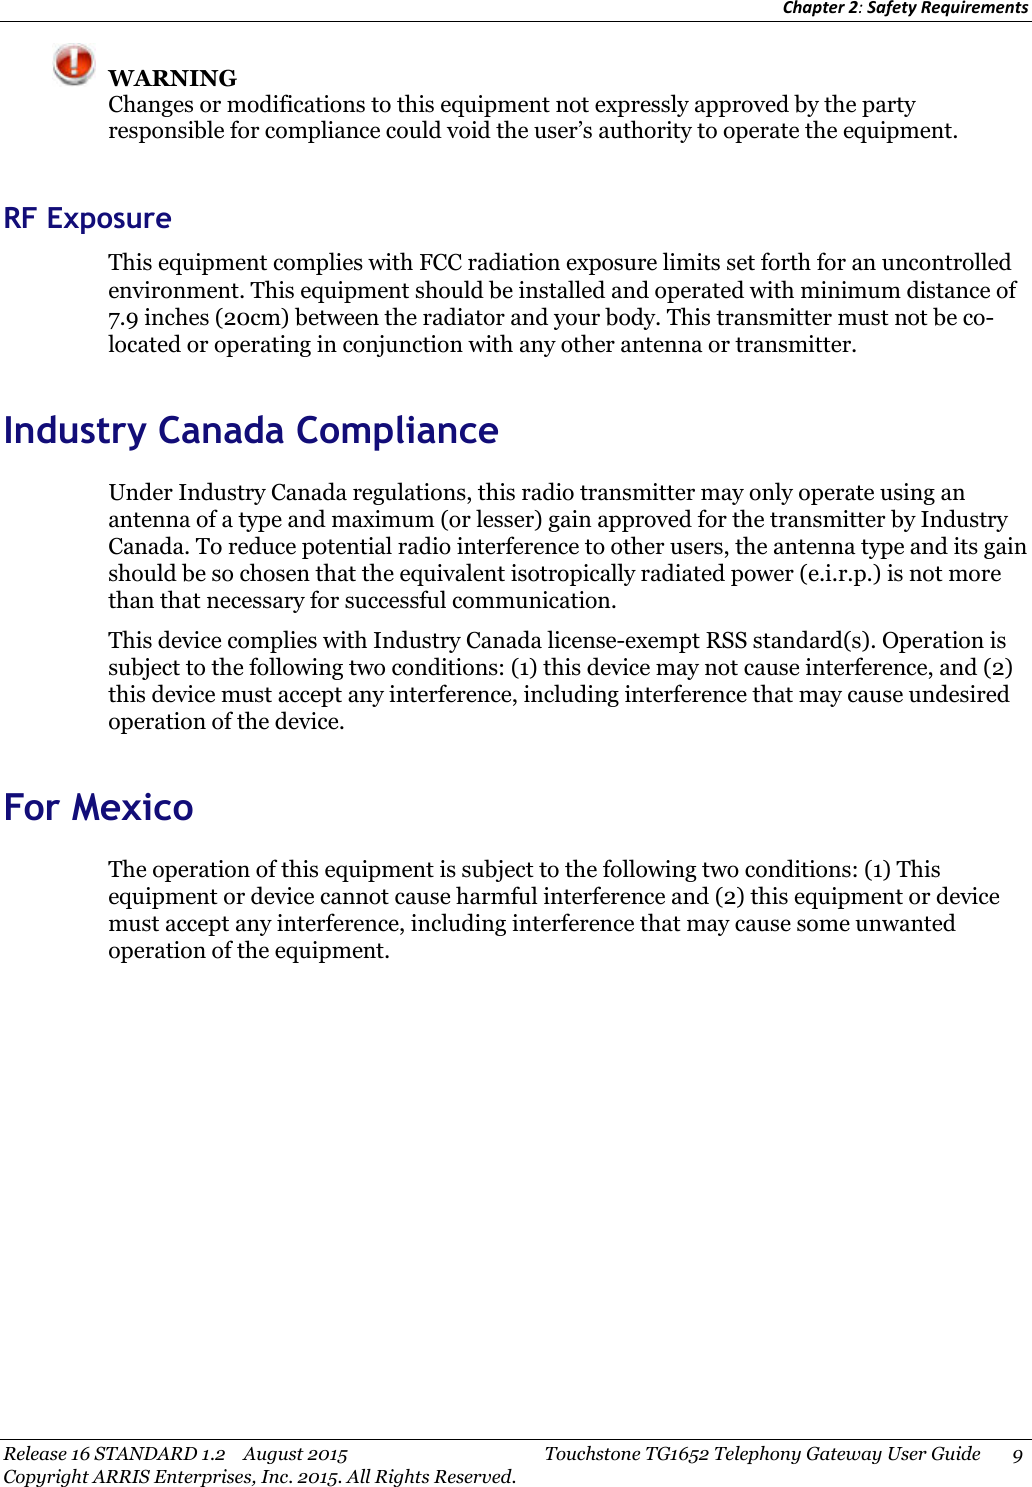 Chapter 2:Safety RequirementsRelease 16 STANDARD 1.2 August 2015 Touchstone TG1652 Telephony Gateway User Guide 9Copyright ARRIS Enterprises, Inc. 2015. All Rights Reserved.WARNINGChanges or modifications to this equipment not expressly approved by the partyresponsible for compliance could void the user’s authority to operate the equipment.RF ExposureThis equipment complies with FCC radiation exposure limits set forth for an uncontrolledenvironment. This equipment should be installed and operated with minimum distance of7.9 inches (20cm) between the radiator and your body. This transmitter must not be co-located or operating in conjunction with any other antenna or transmitter.Industry Canada ComplianceUnder Industry Canada regulations, this radio transmitter may only operate using anantenna of a type and maximum (or lesser) gain approved for the transmitter by IndustryCanada. To reduce potential radio interference to other users, the antenna type and its gainshould be so chosen that the equivalent isotropically radiated power (e.i.r.p.) is not morethan that necessary for successful communication.This device complies with Industry Canada license-exempt RSS standard(s). Operation issubject to the following two conditions: (1) this device may not cause interference, and (2)this device must accept any interference, including interference that may cause undesiredoperation of the device.For MexicoThe operation of this equipment is subject to the following two conditions: (1) Thisequipment or device cannot cause harmful interference and (2) this equipment or devicemust accept any interference, including interference that may cause some unwantedoperation of the equipment.